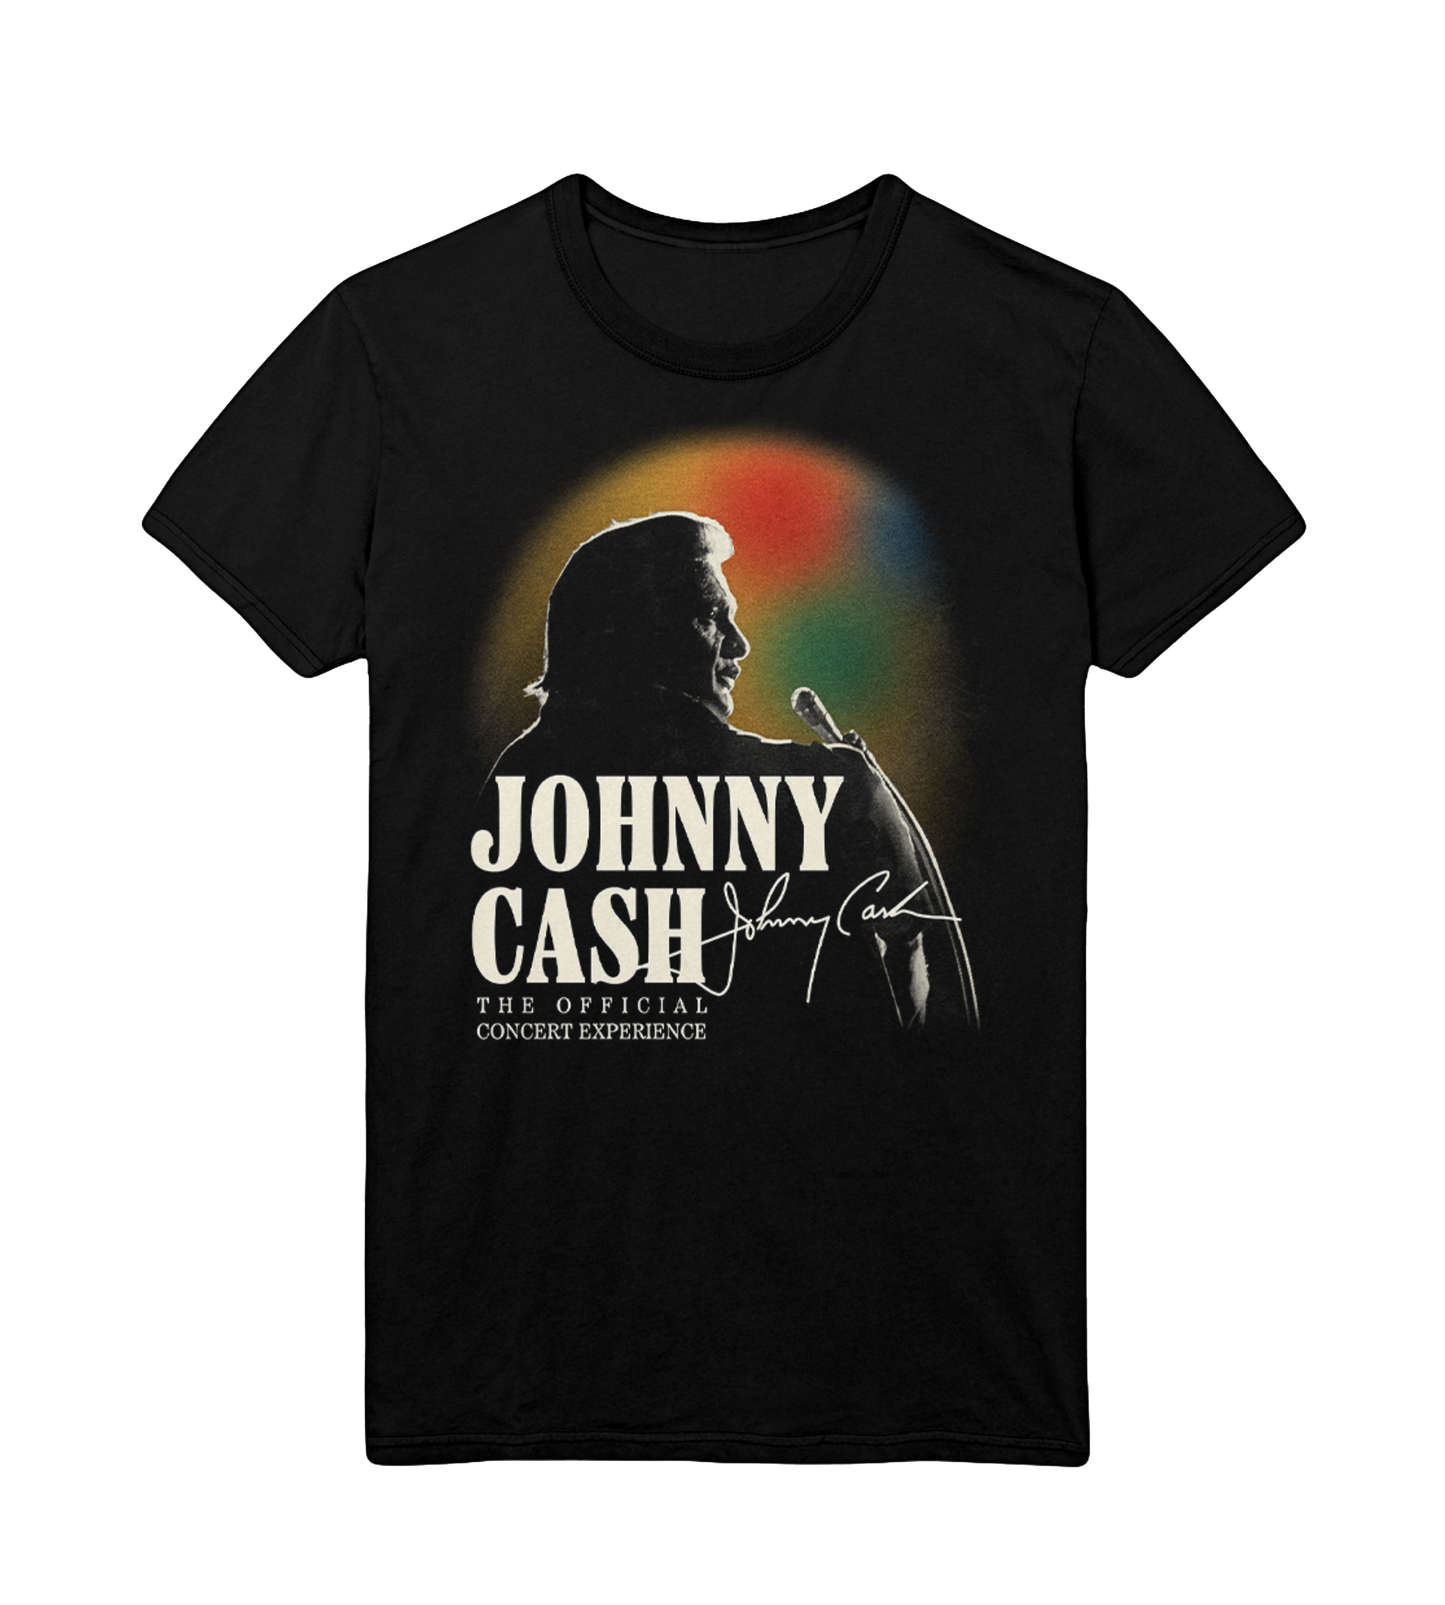 Johnny Cash: The Official Concert Experience T-Shirt